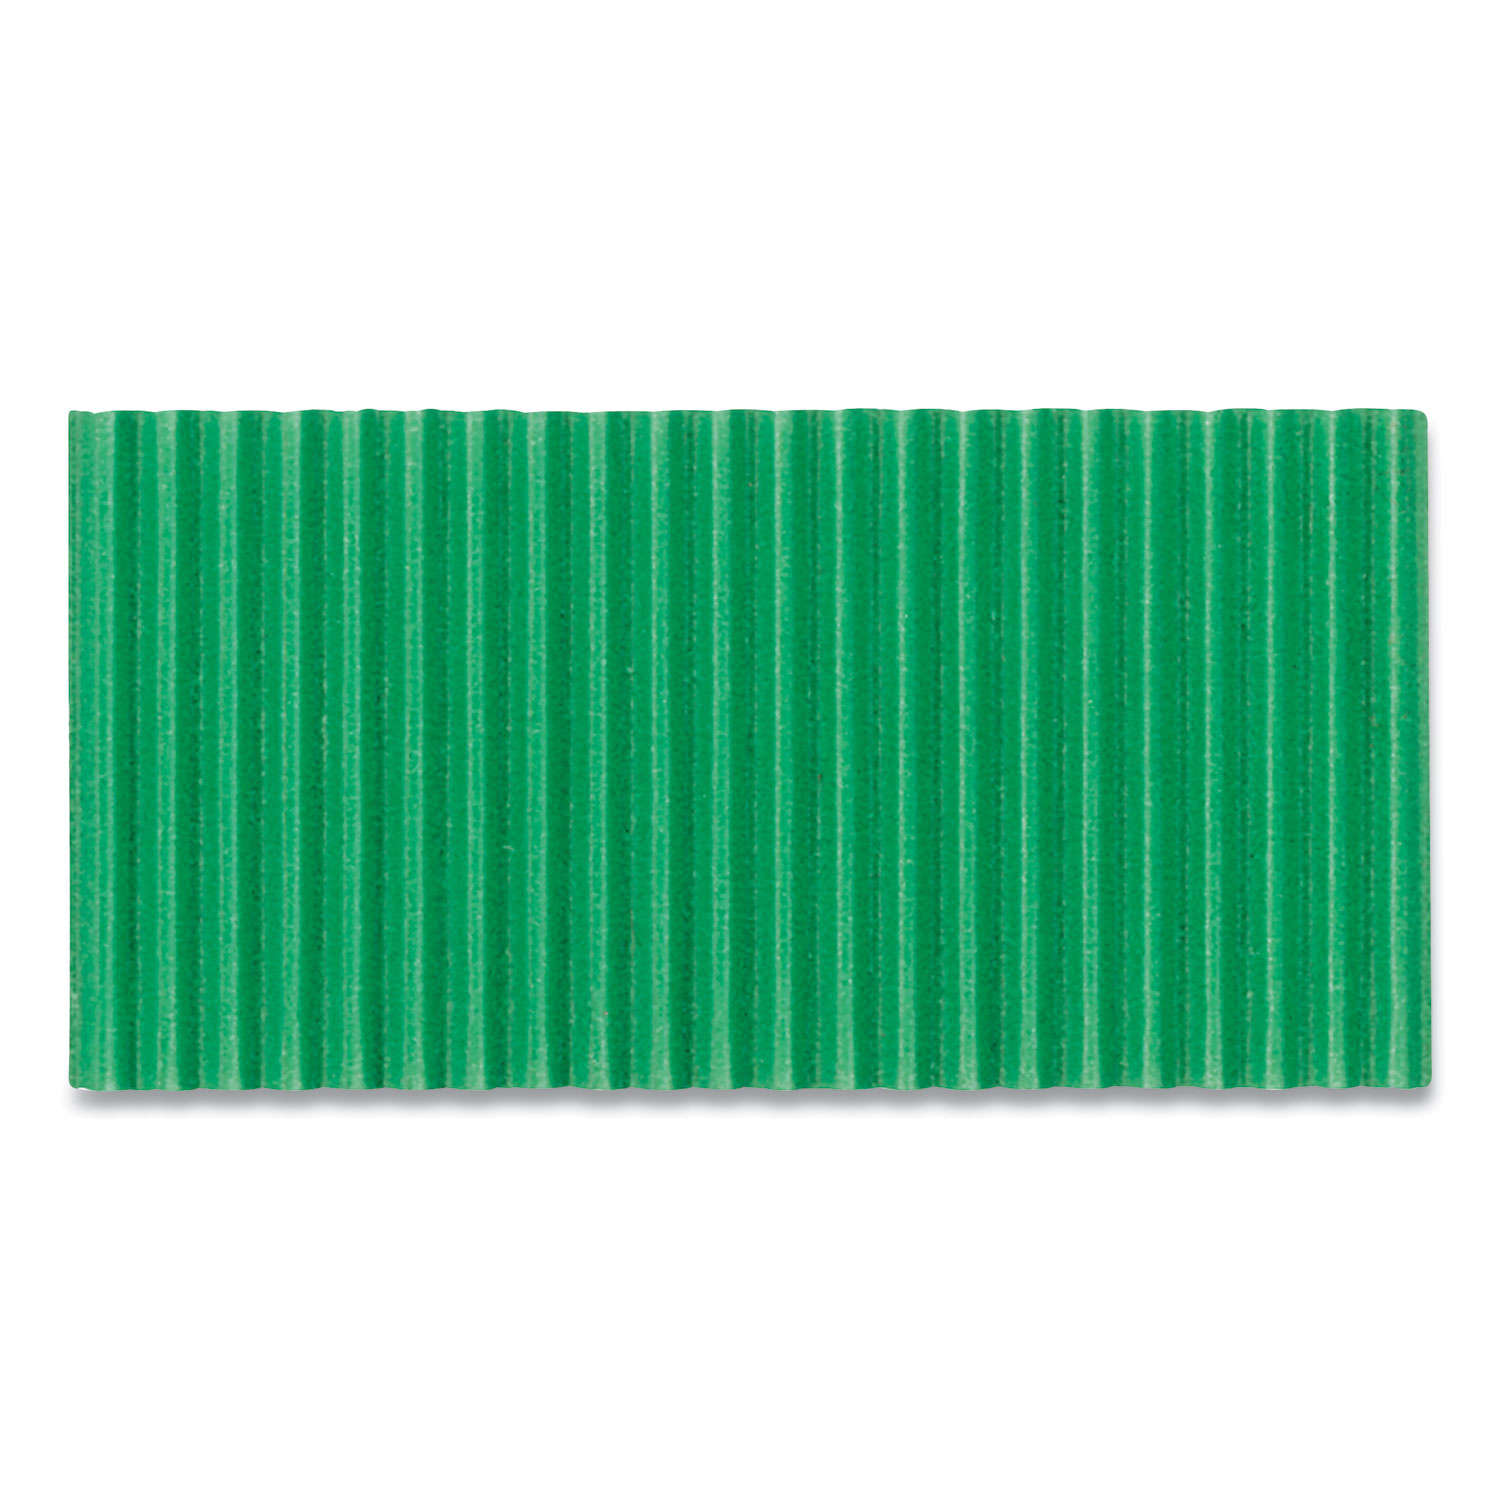  Pacon 0011141 Corobuff Corrugated Paper Roll, 48 x 25 ft, Emerald Green (PAC24392416) 